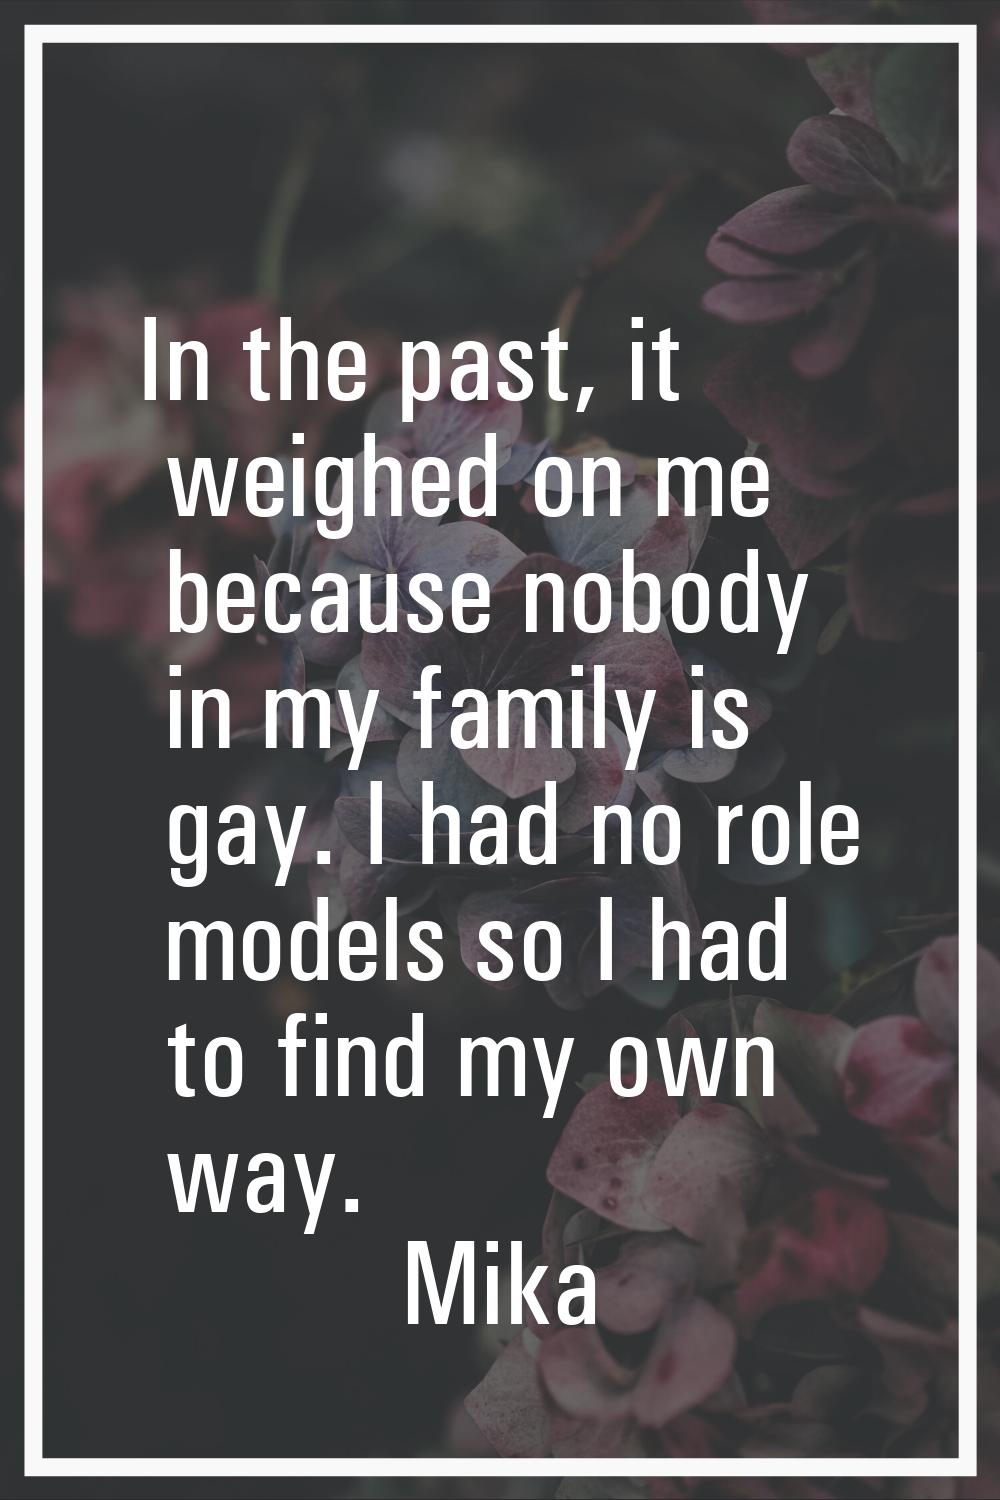 In the past, it weighed on me because nobody in my family is gay. I had no role models so I had to 